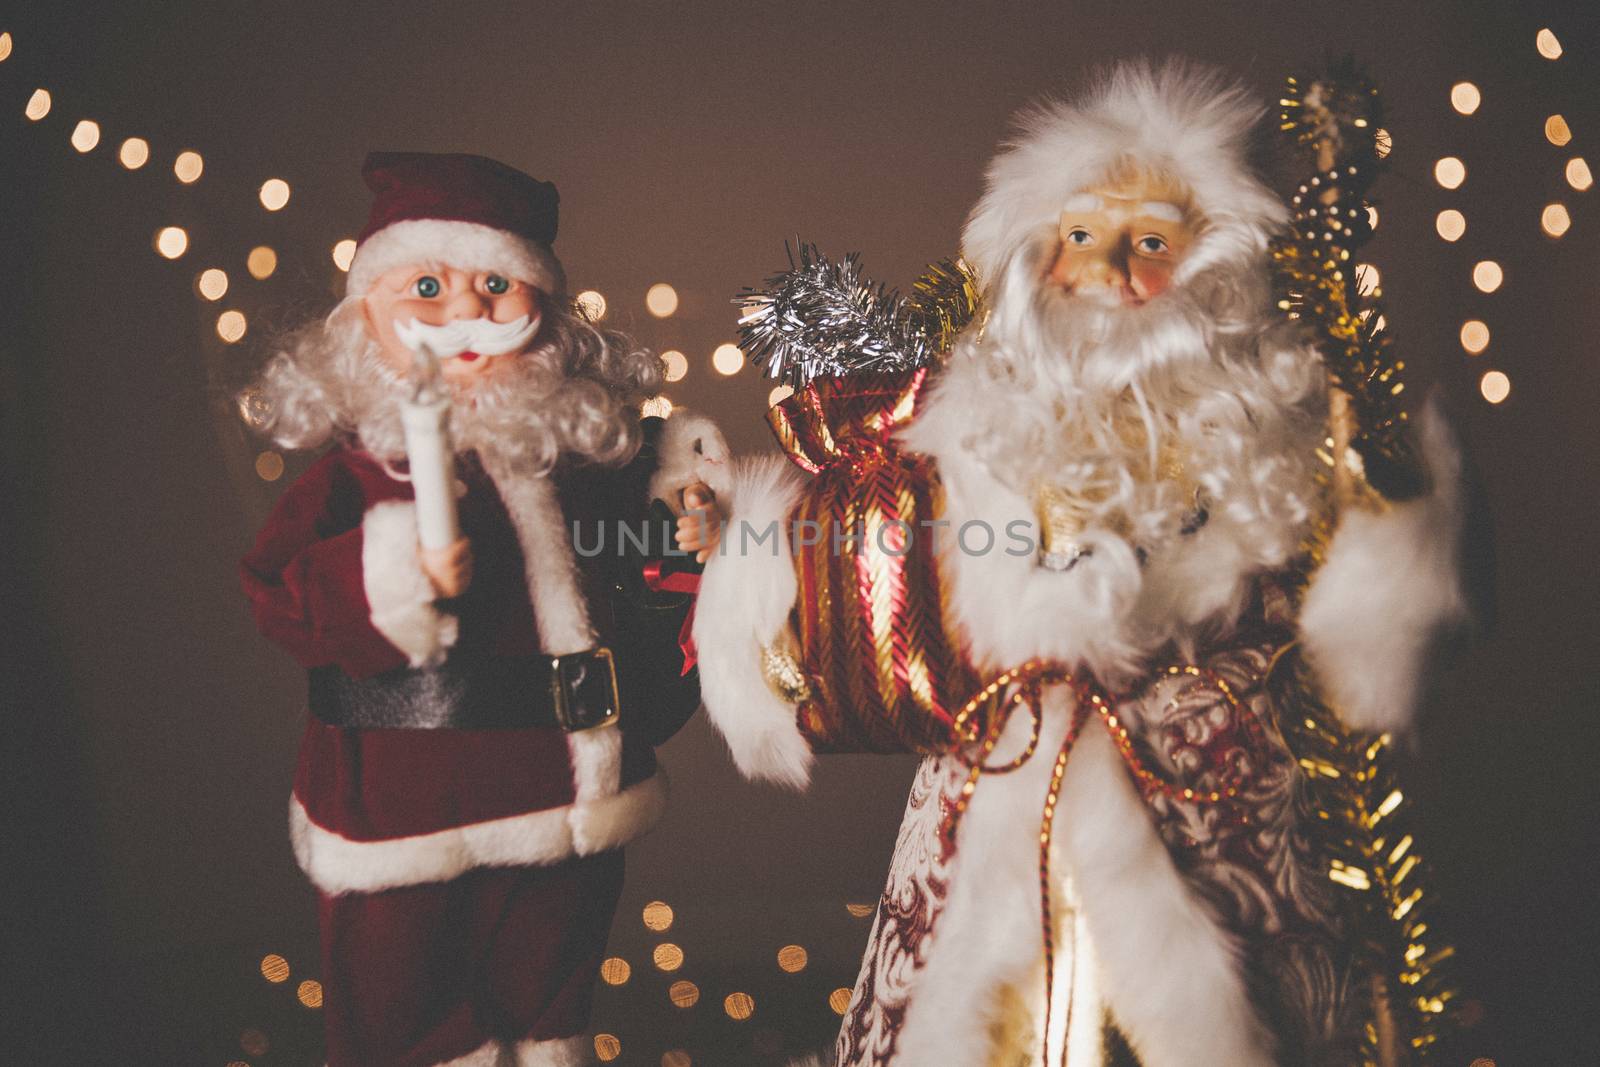 Father Frost and Santa Klaus figurines together, New Year 2019